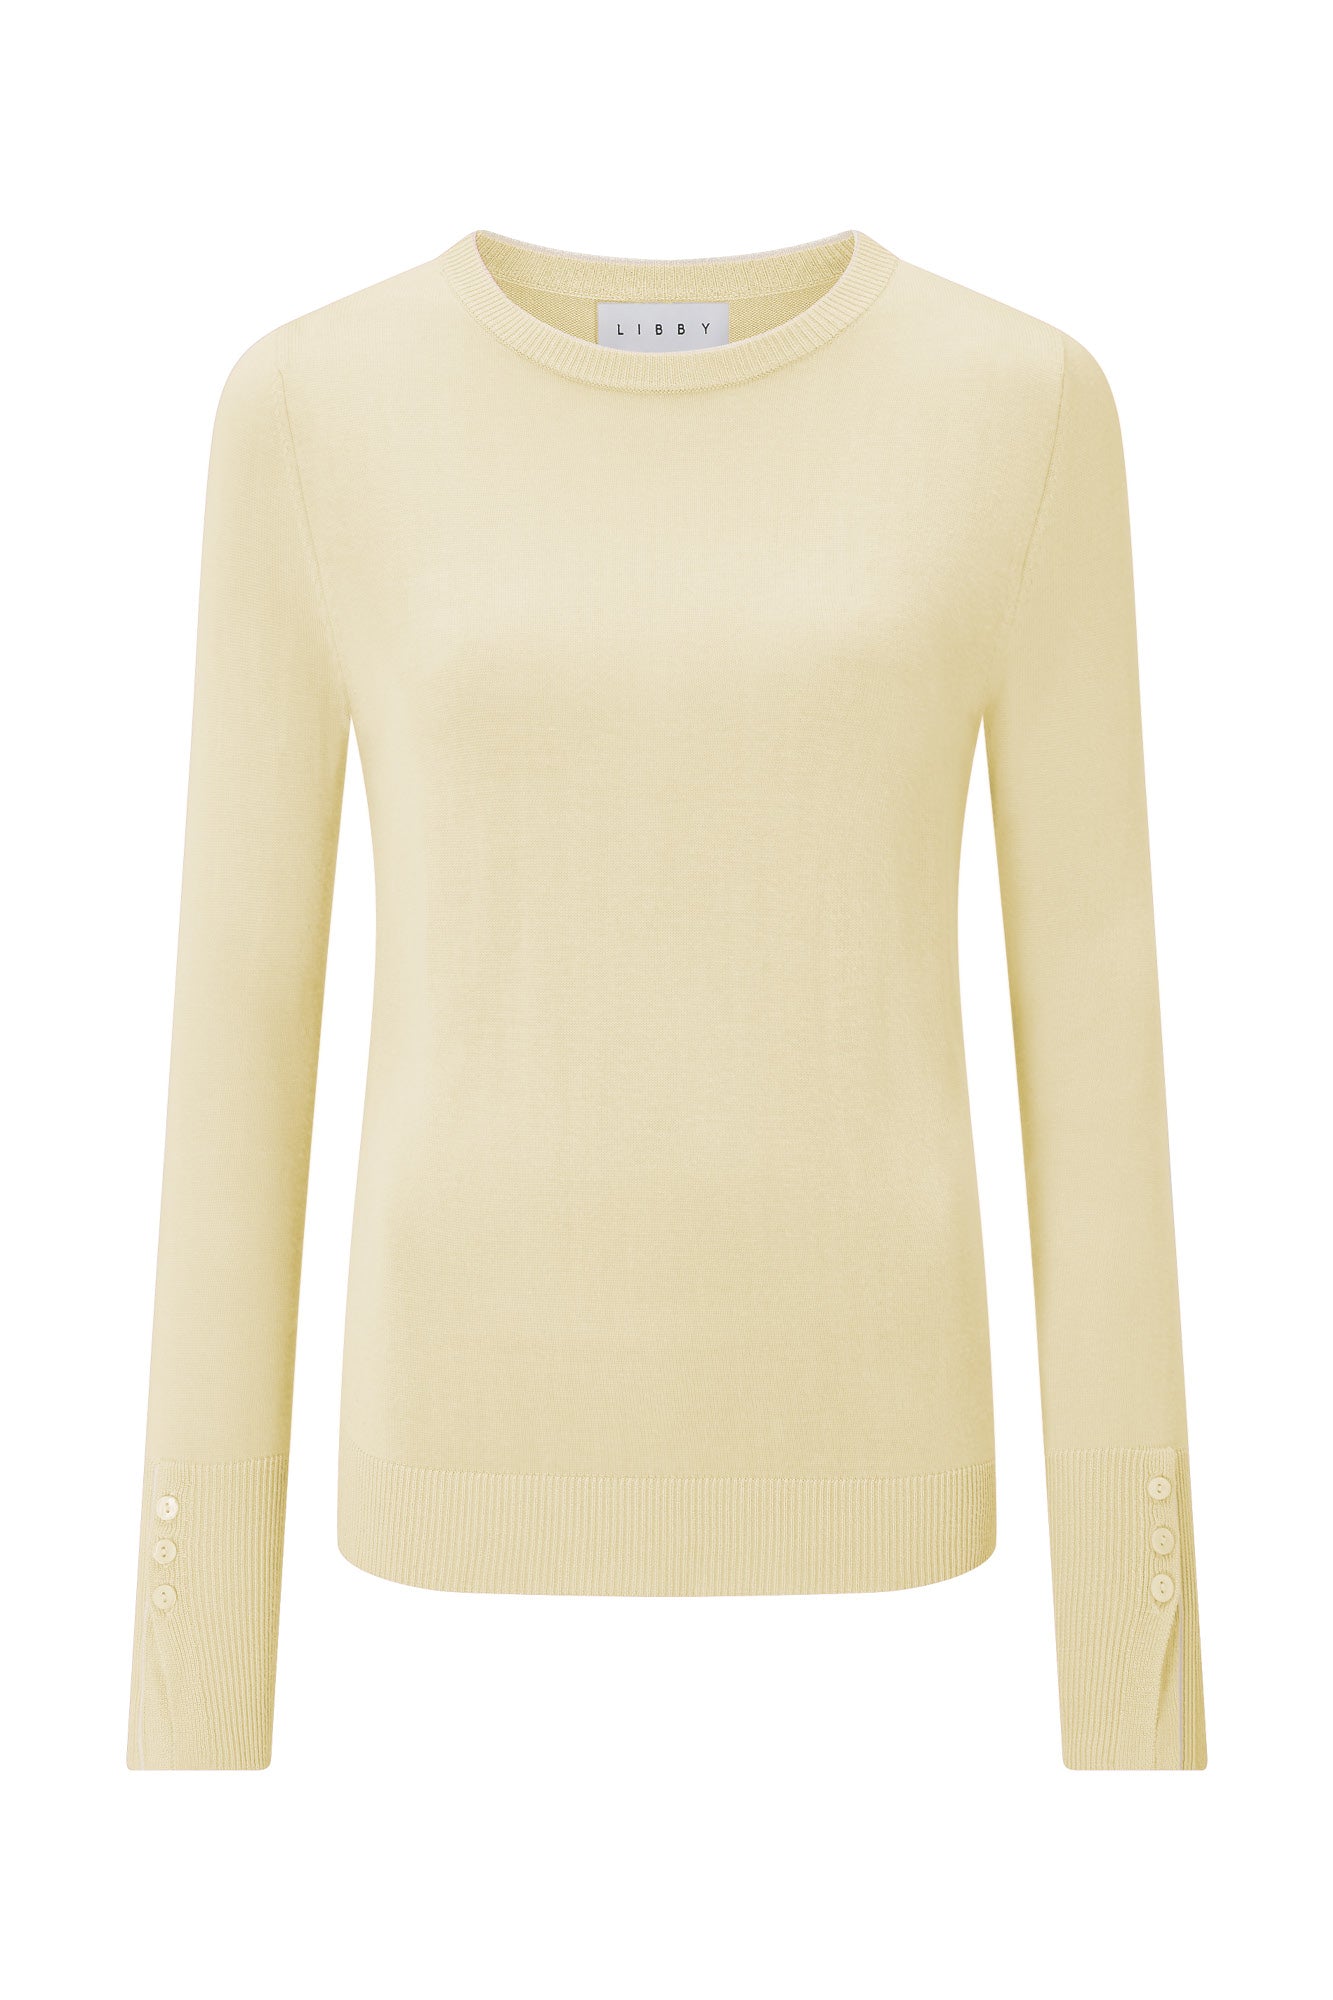 Maddy Pale Yellow and Ivory Jumper